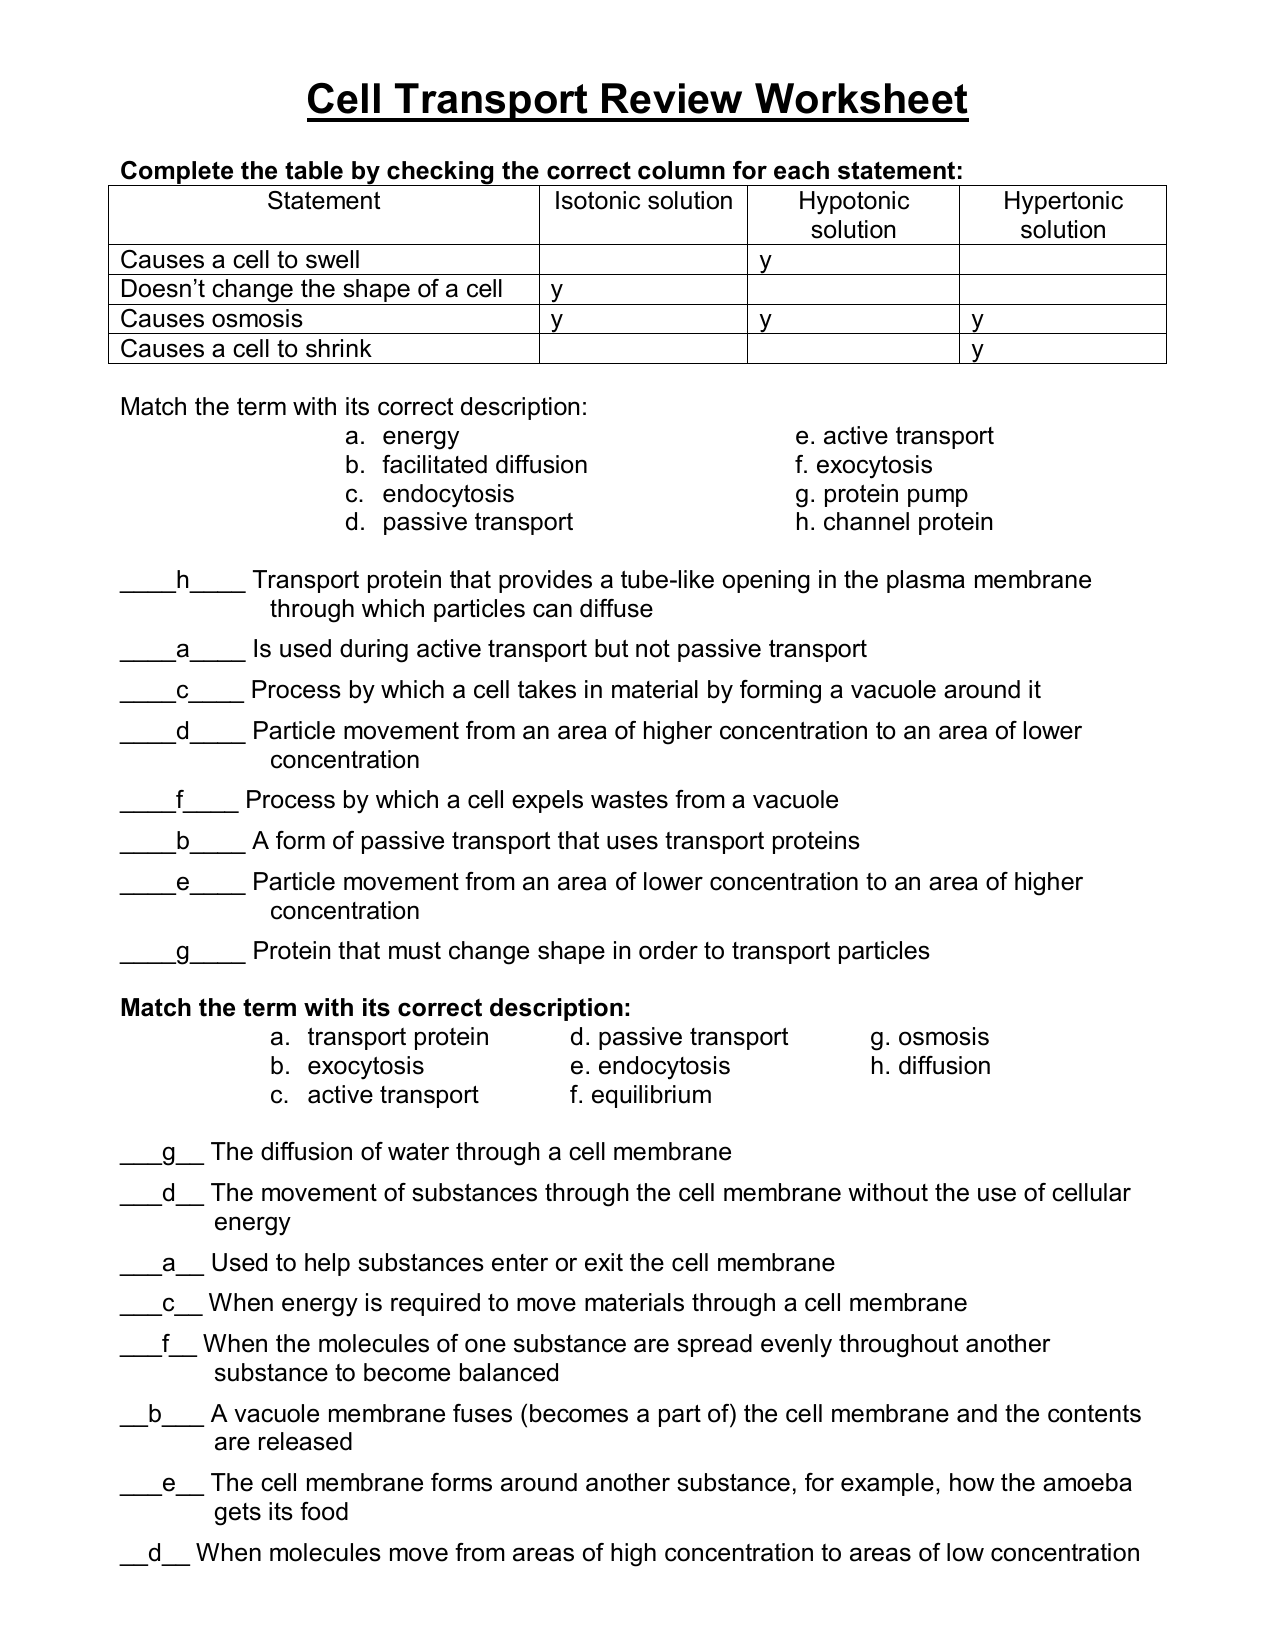 Cell Transport Review Answers Within Cell Transport Review Worksheet Answers